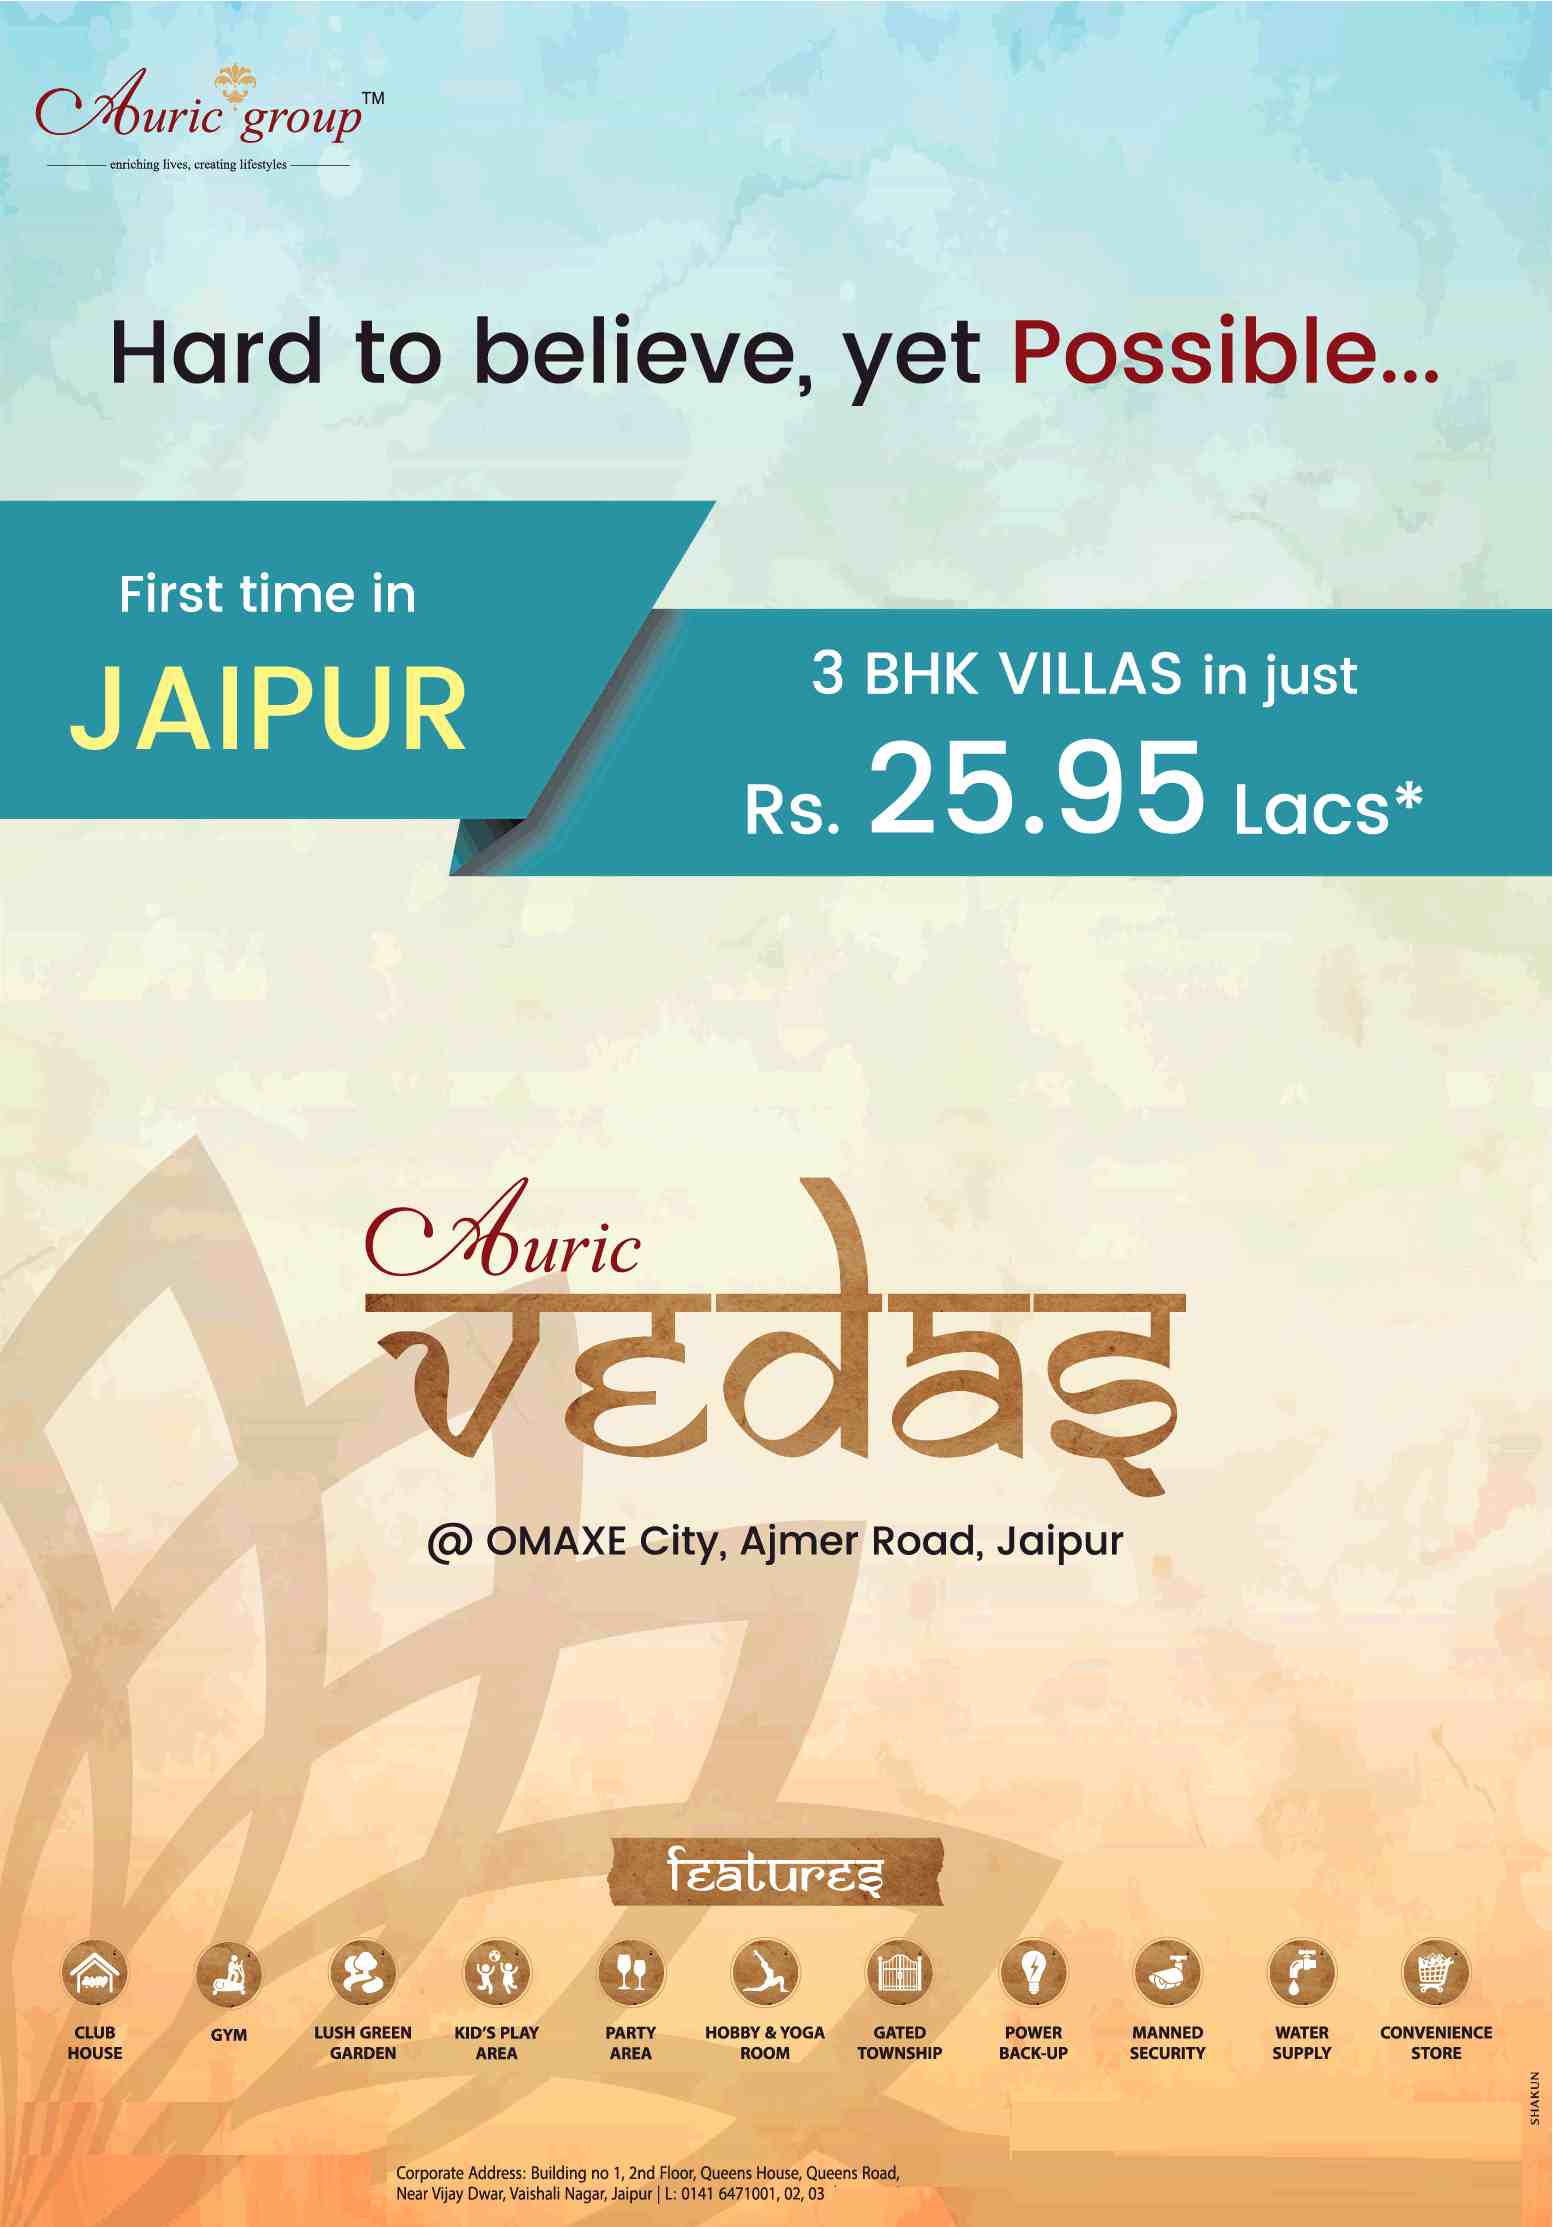 3 BHK Villas for just Rs. 25.95 lacs is hard to believe but yet possible at Auric Vedas in Jaipur Update